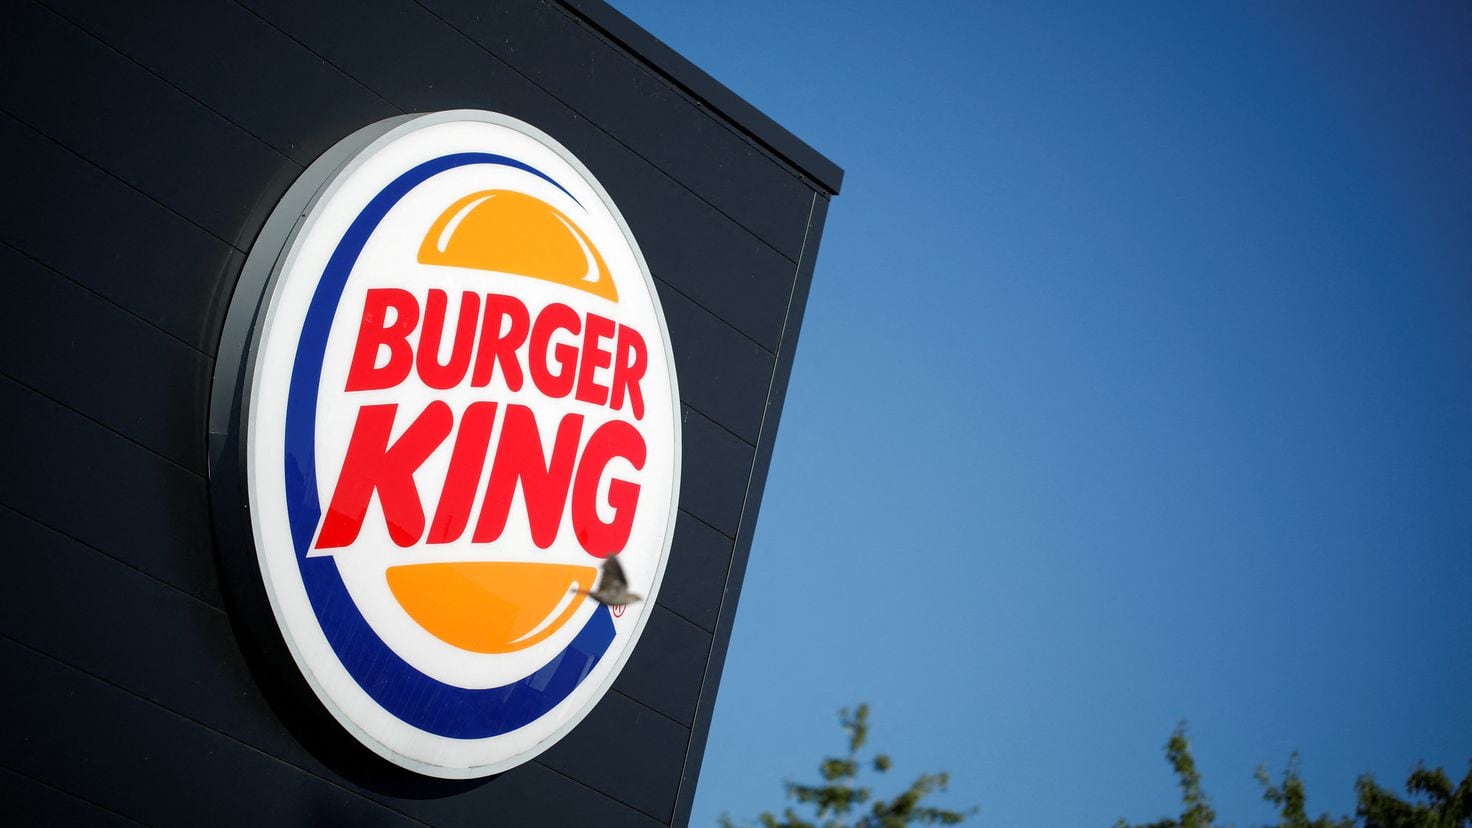 Burger King restaurants are closing their doors: The fast food chain is on track to close up to 400 locations